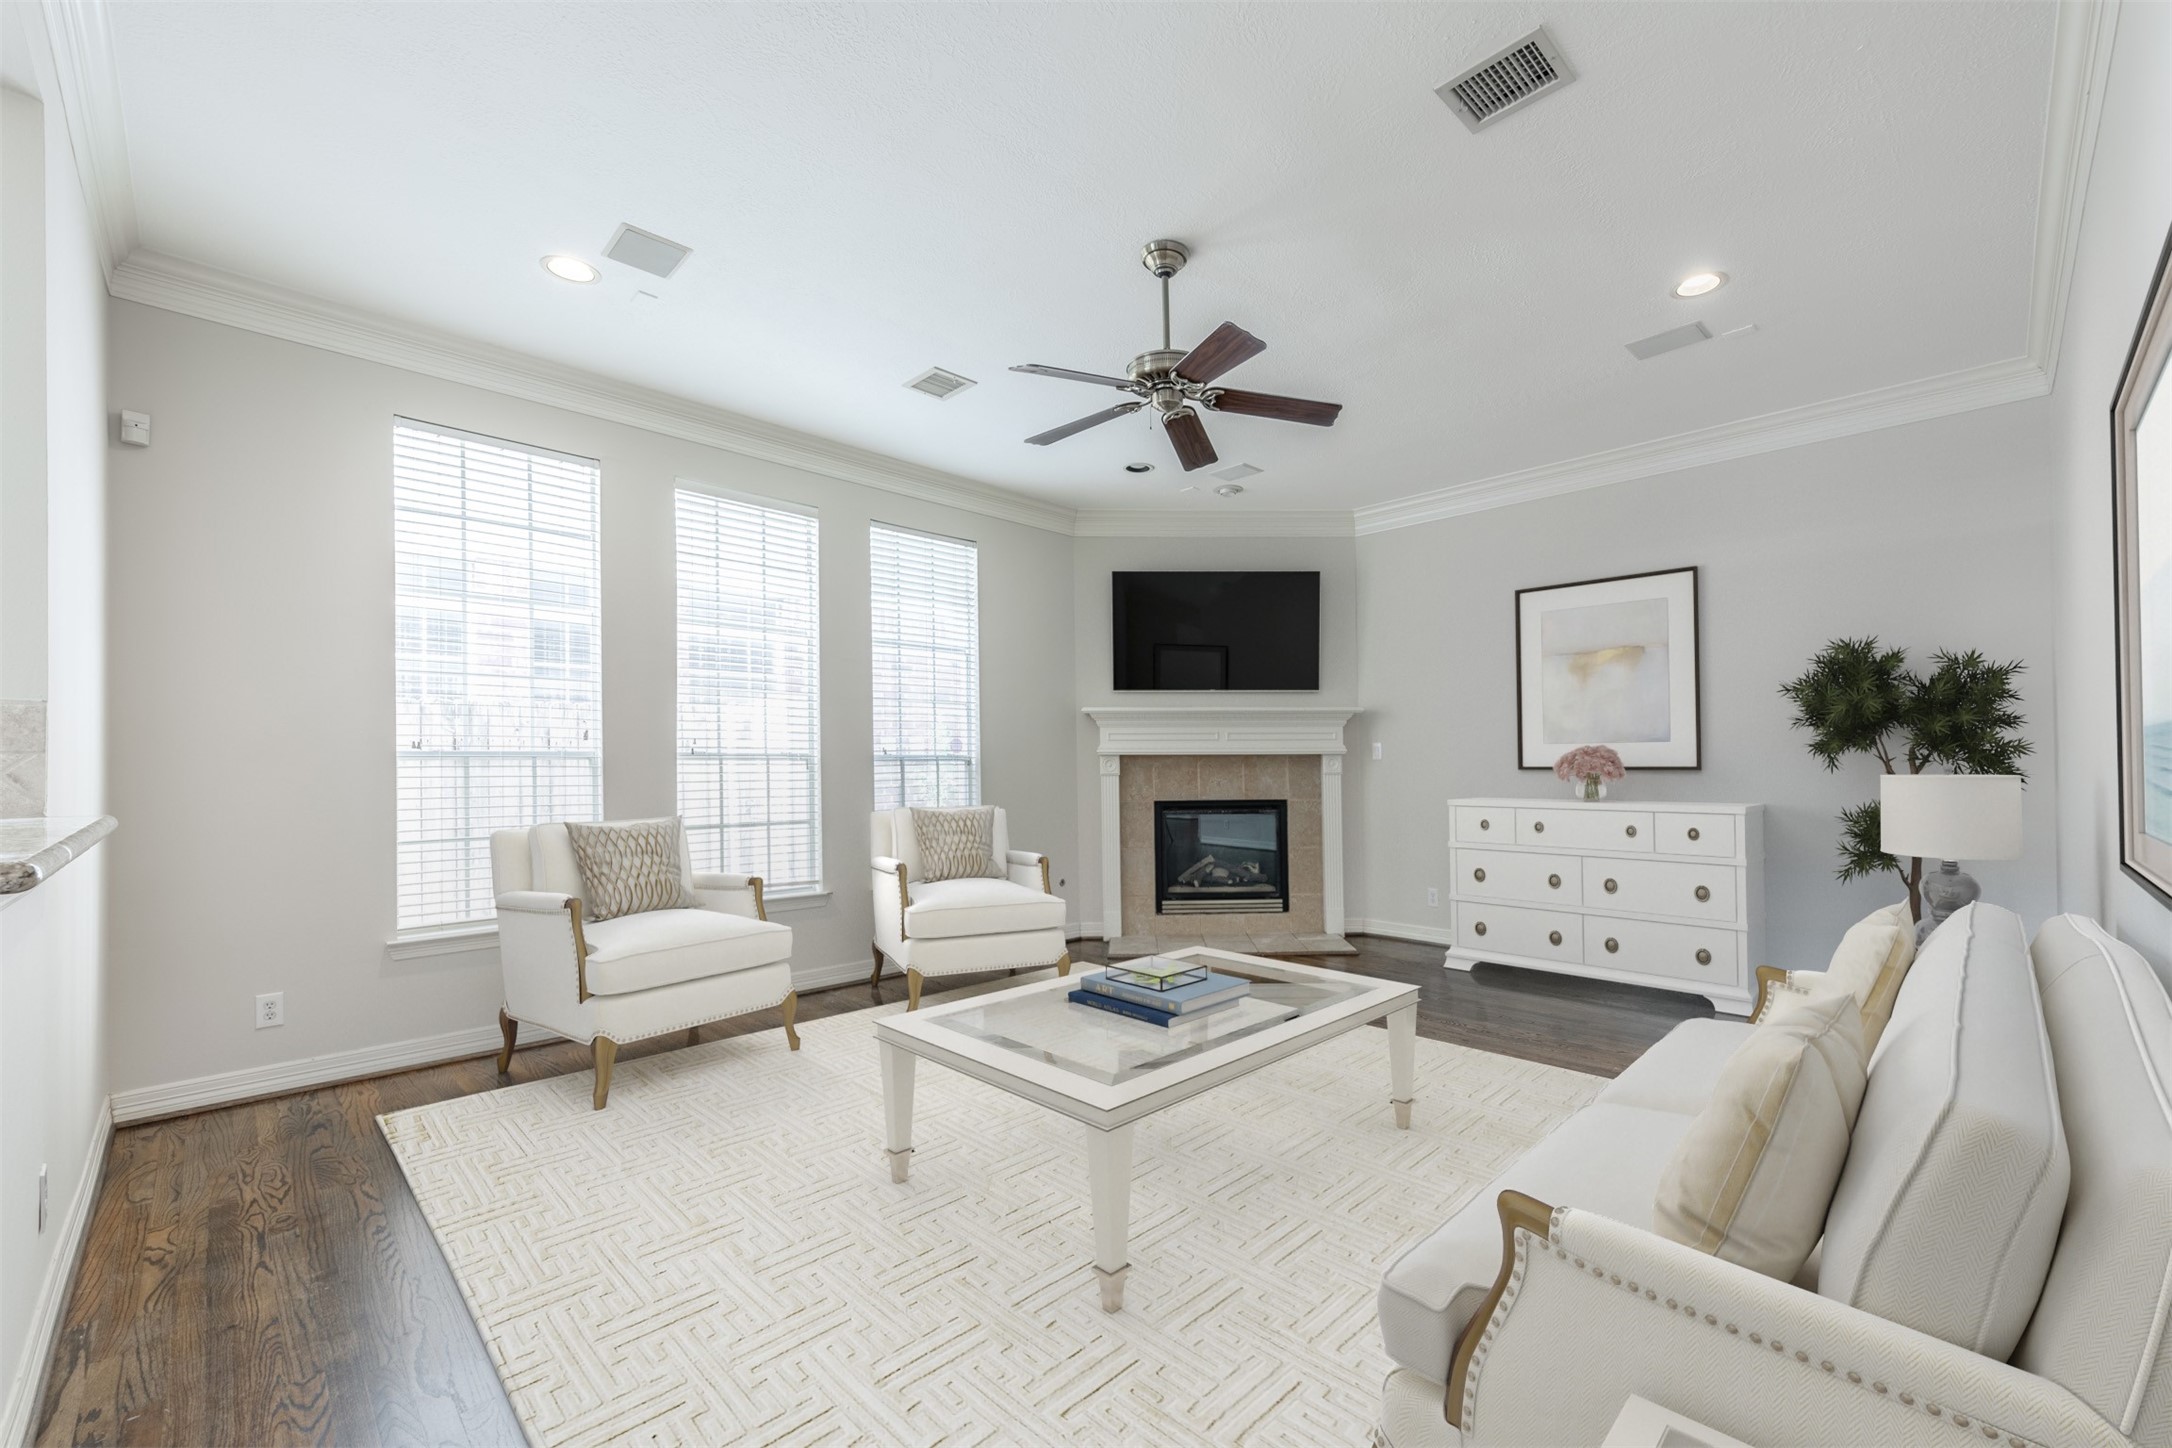 This inviting family room provides a lovely gathering place for your family and friends! Featuring high ceilings, wood flooring, fireplace & mantel and wall of windows bringing in lots of natural light! *virtually stage